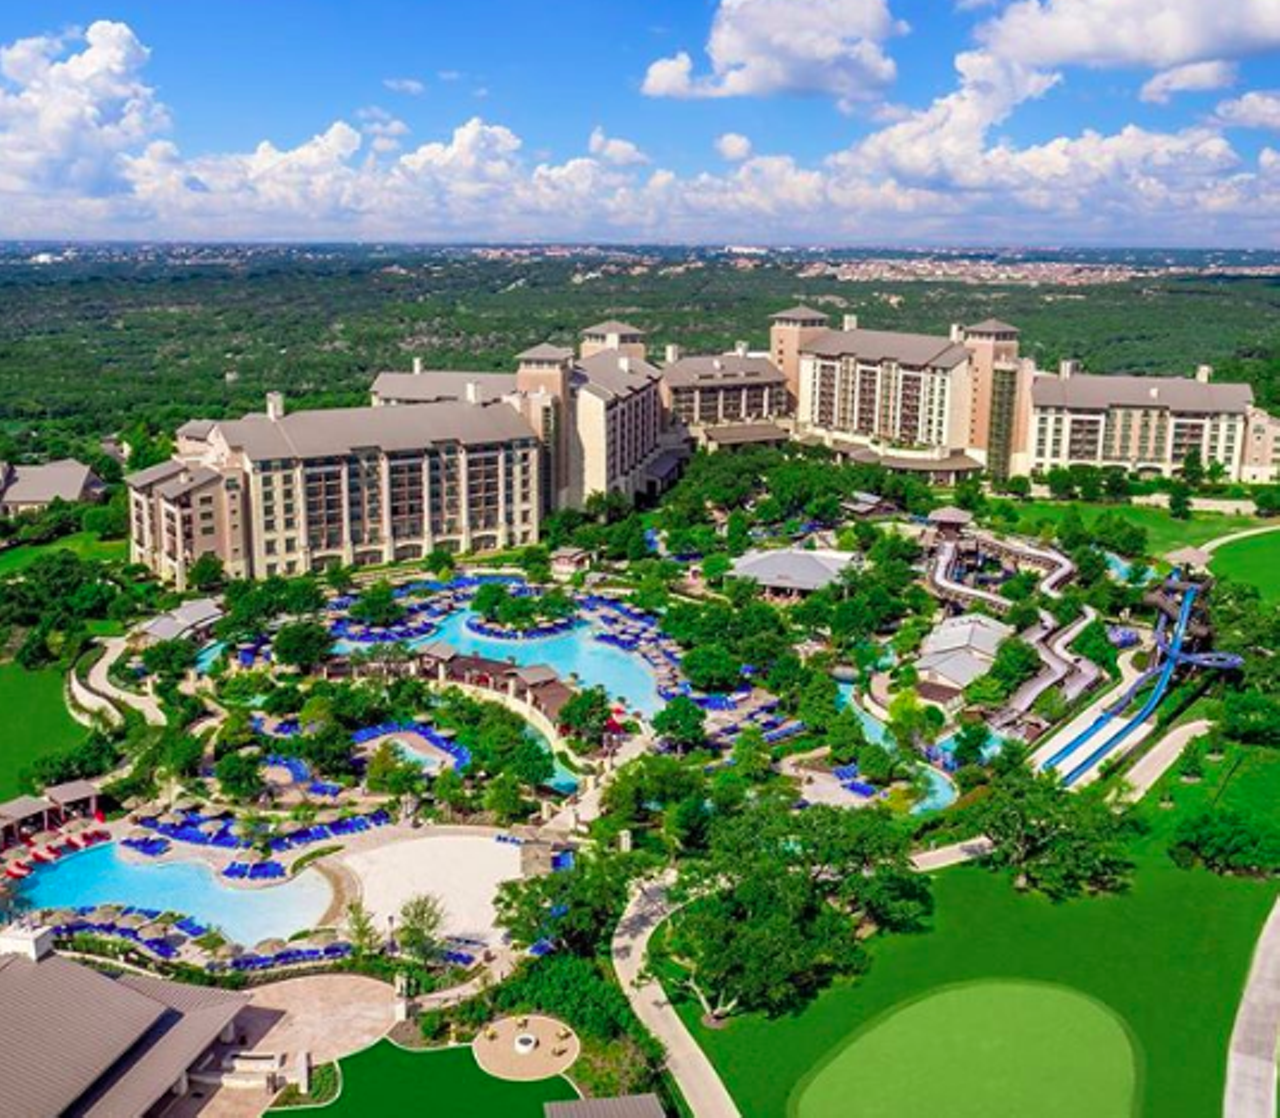 JW Marriott San Antonio Hill Country Resort & Spa
23808 Resort Pkwy, (210) 276-2500, marriott.com
Found in the Far West Side of San Antonio, this sprawling resort is home to one of the most amazing hotel pools in the Alamo City. There’s plenty of spots to swim here – there’s a children’s pool and play area, an adult-only infinity pool, a lazy river complete with a slide and pool as well as a lantana spa pool. Make time to hit up as many of these spots as you can.
Photo via Instagram / jwsanantonio